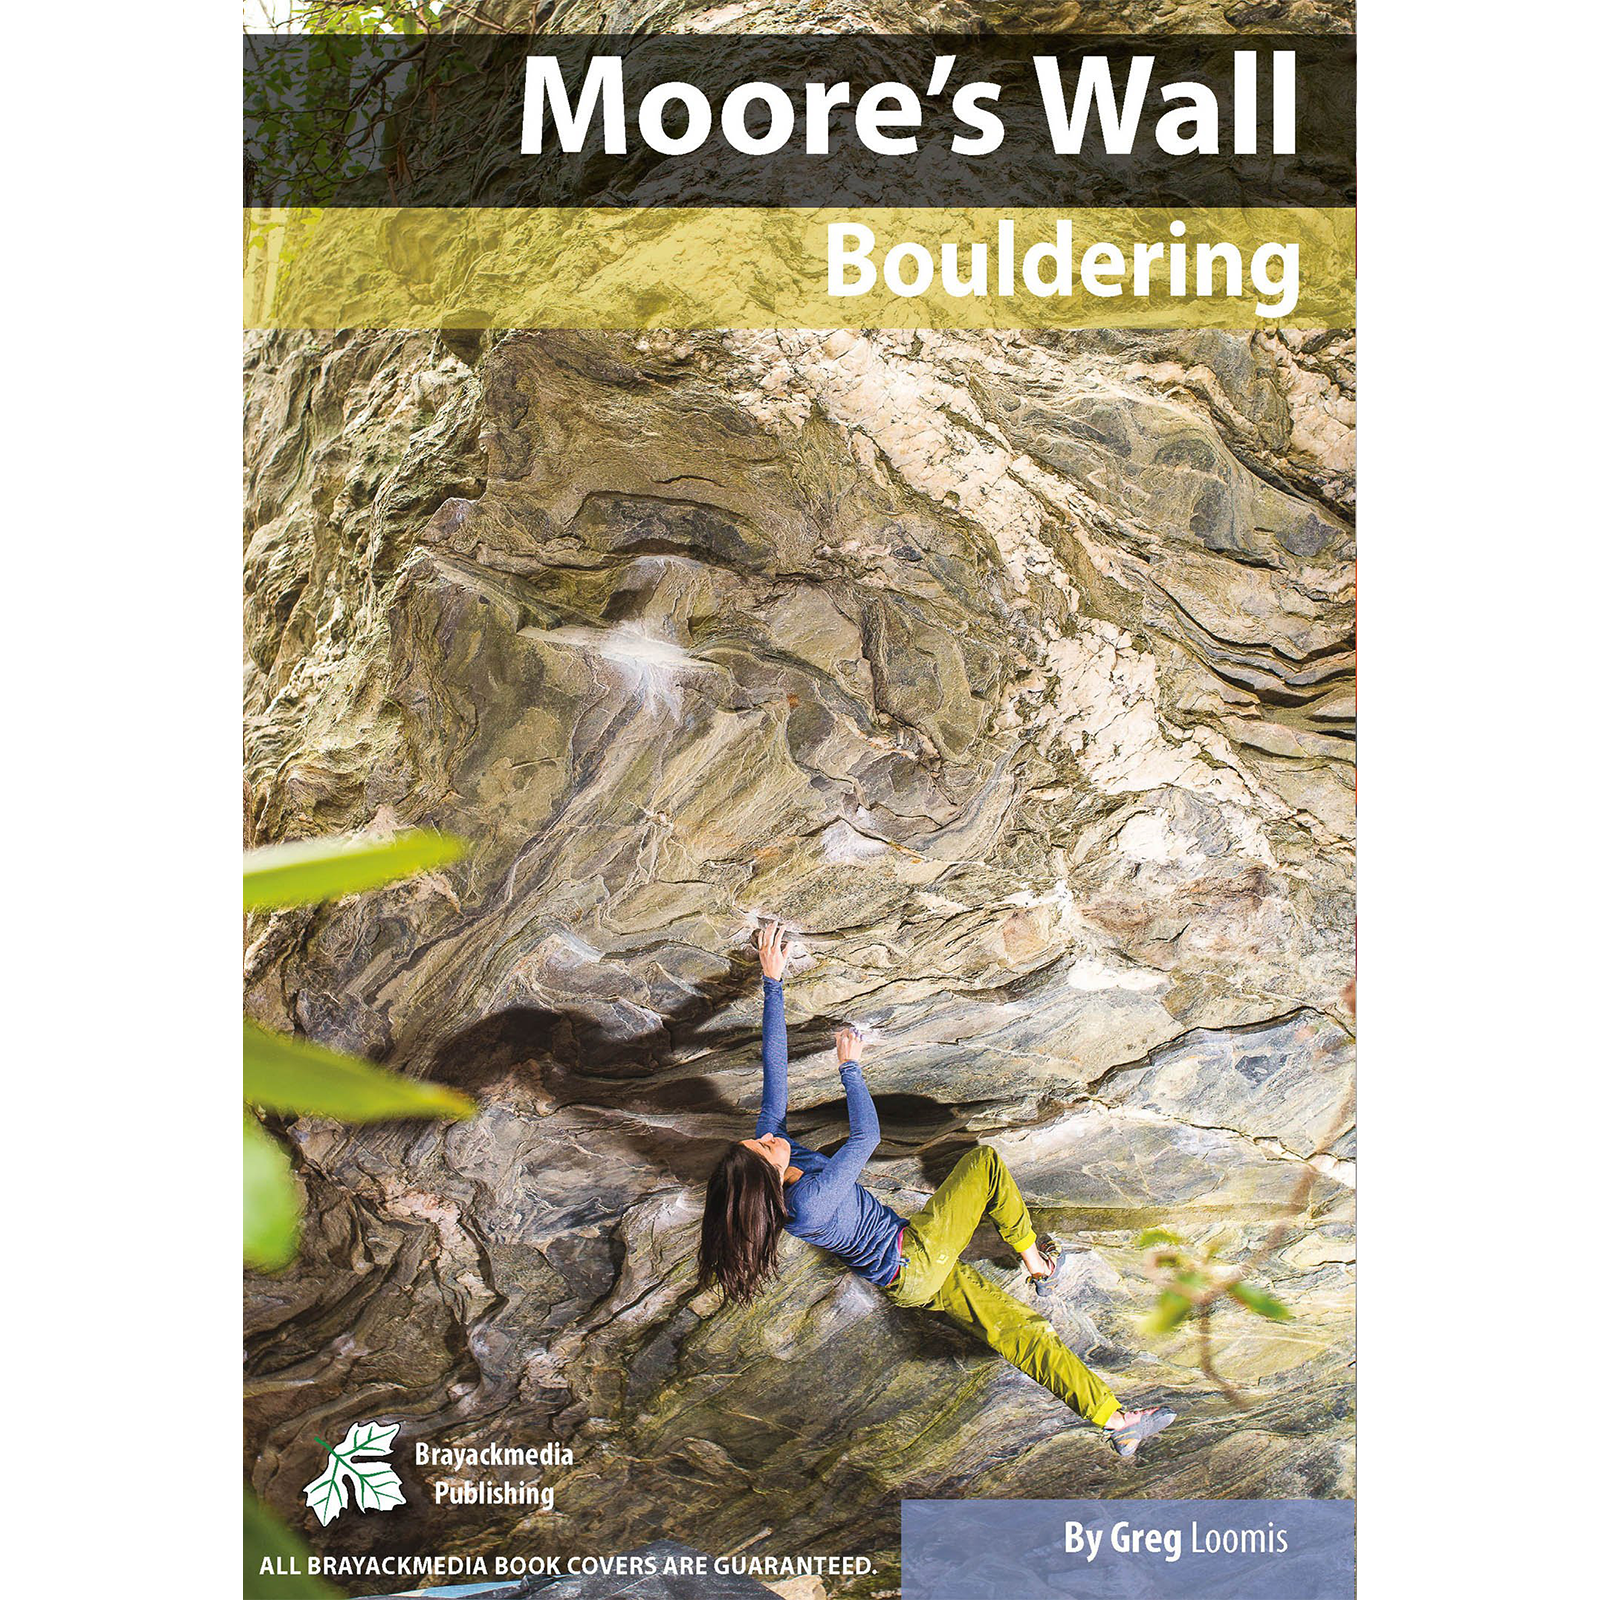 Moore’s Wall Bouldering